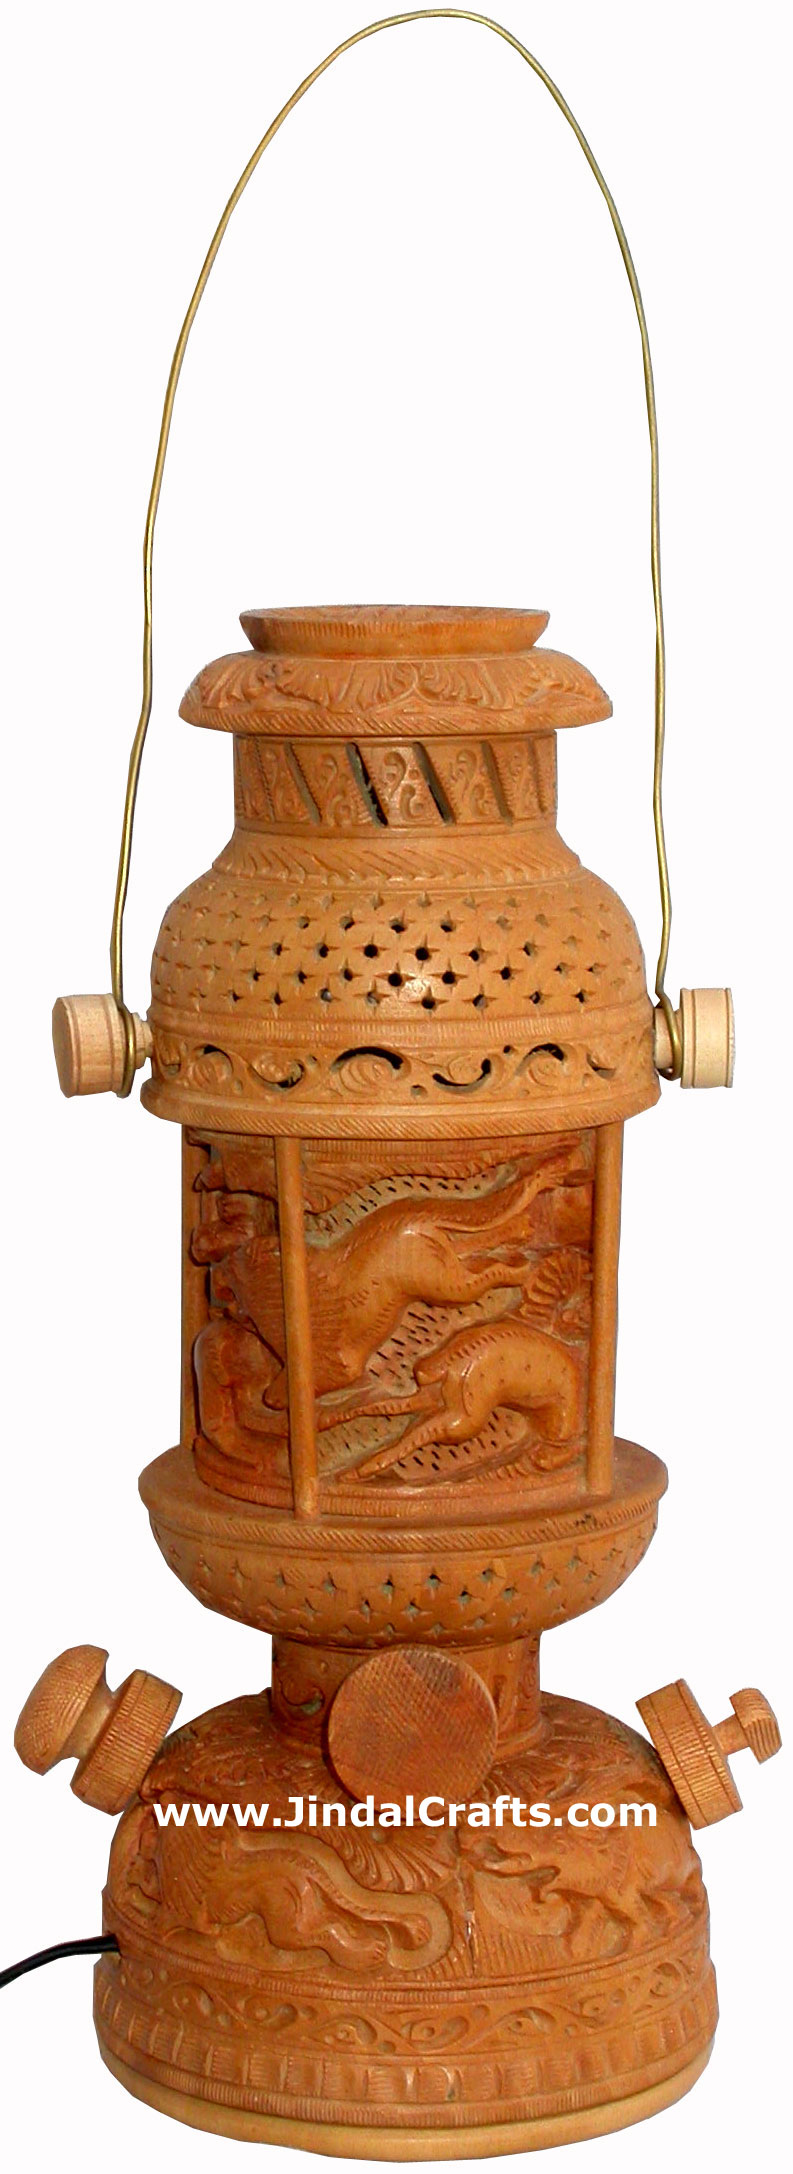 Wood Jungle Lamp Shade Hand Carved Jaali Design Rich Art Handicrafts from India